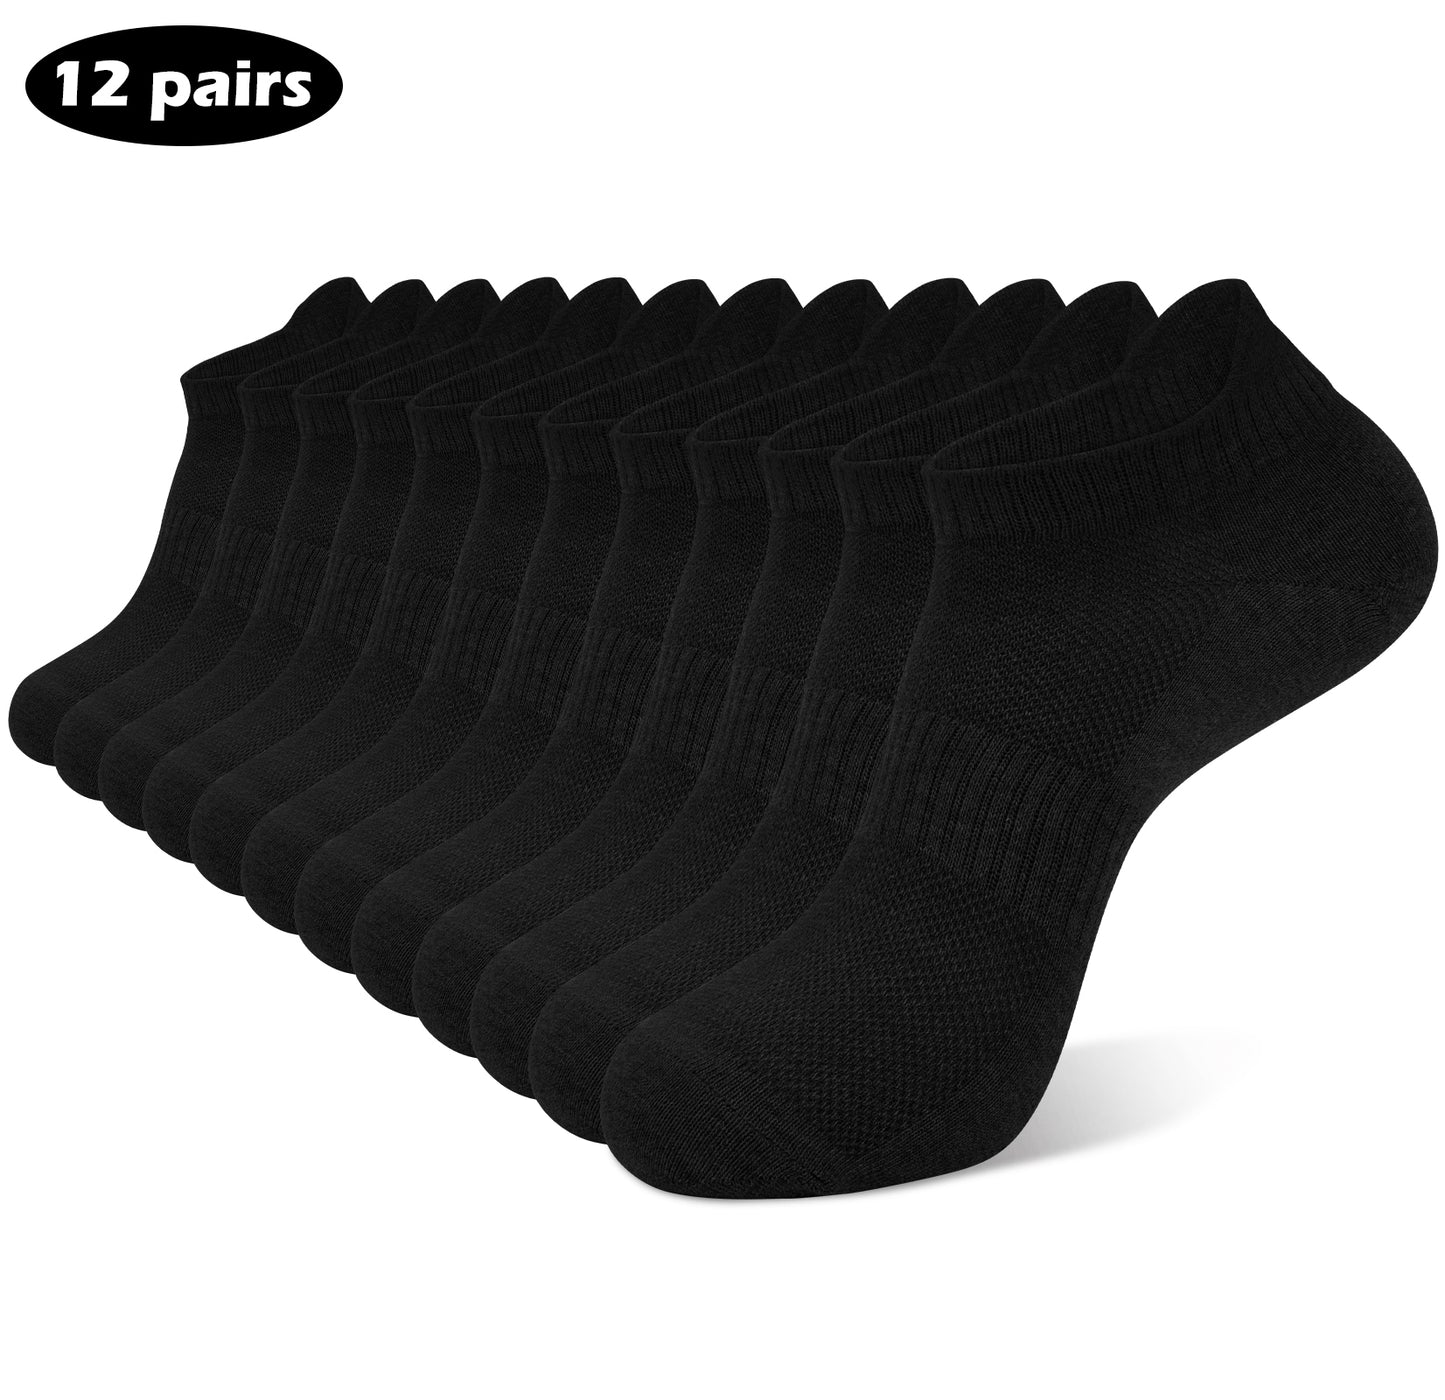 Loritta 12 Pairs Ankle Socks Men No Show Breathable Cotton Casual & Workout Low Cut Crew Athletic Socks for Men